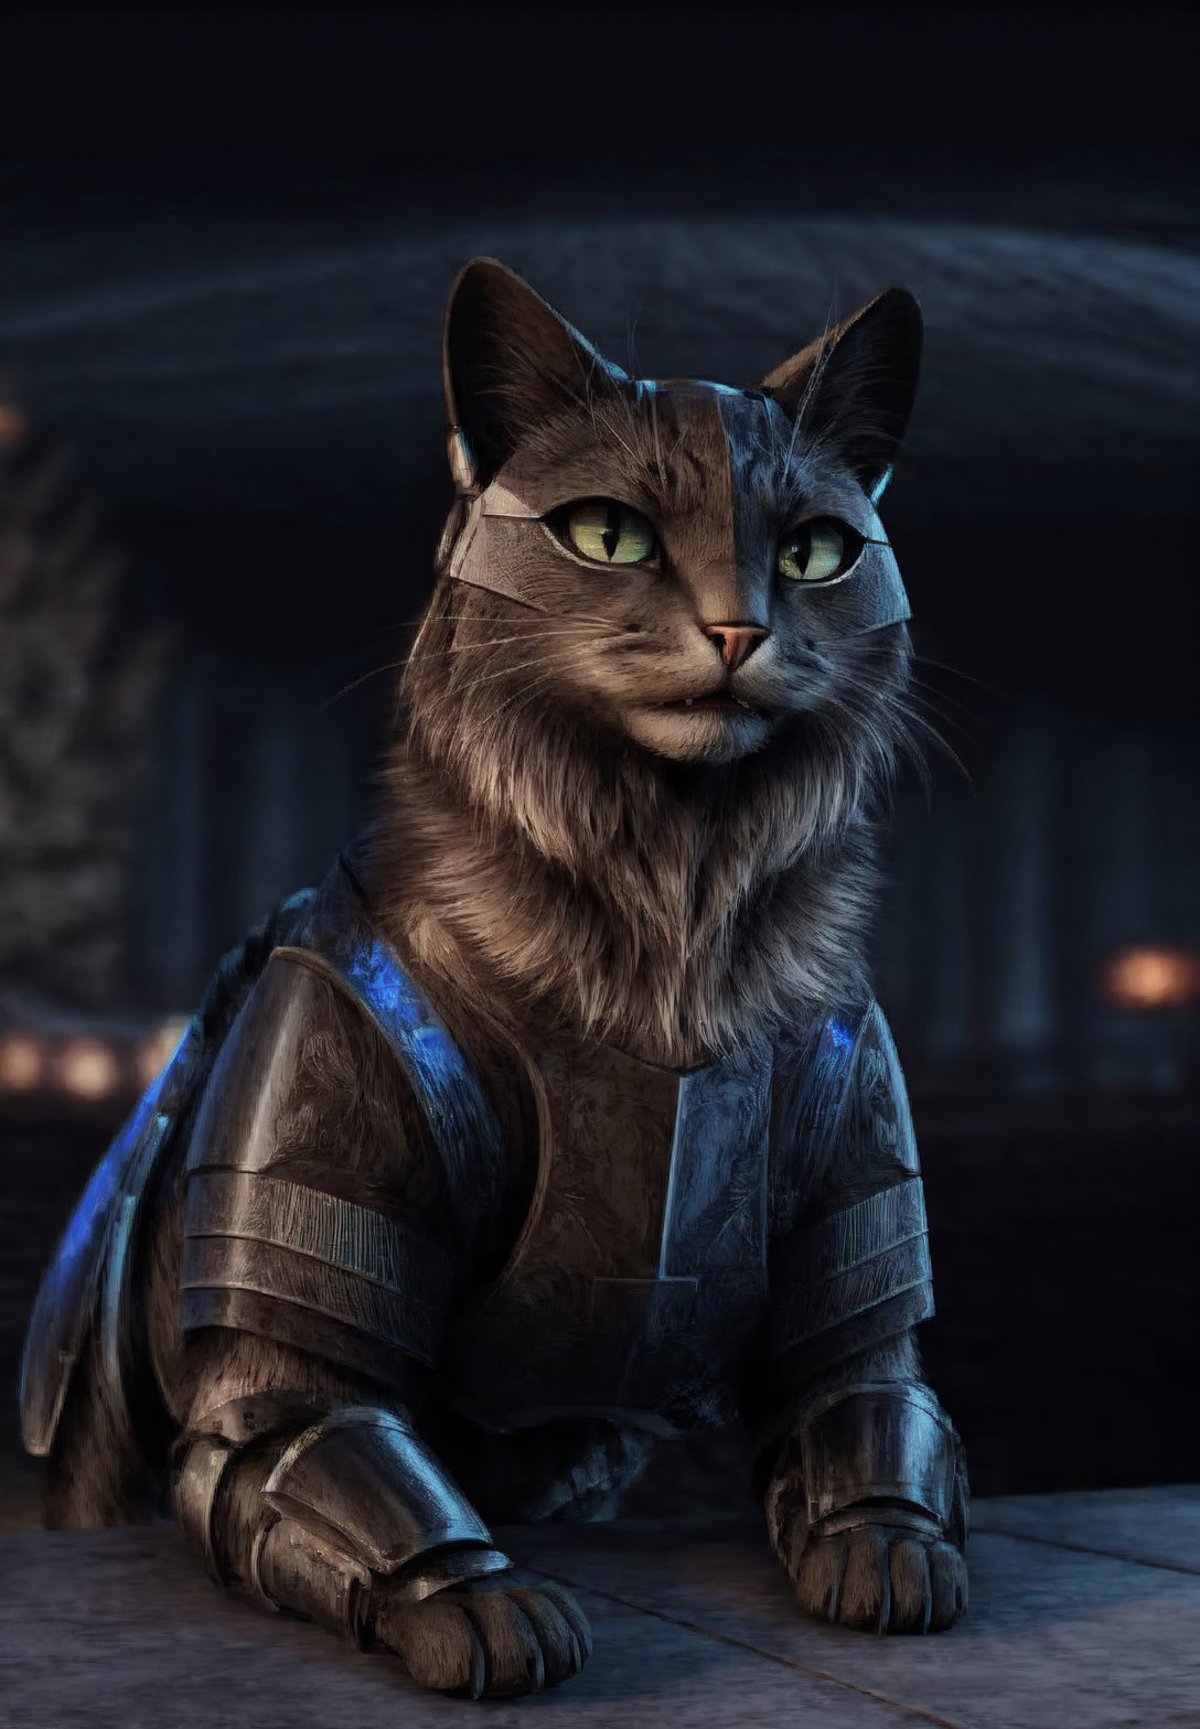 Cat from Baldur's Gate 3 image by GK0